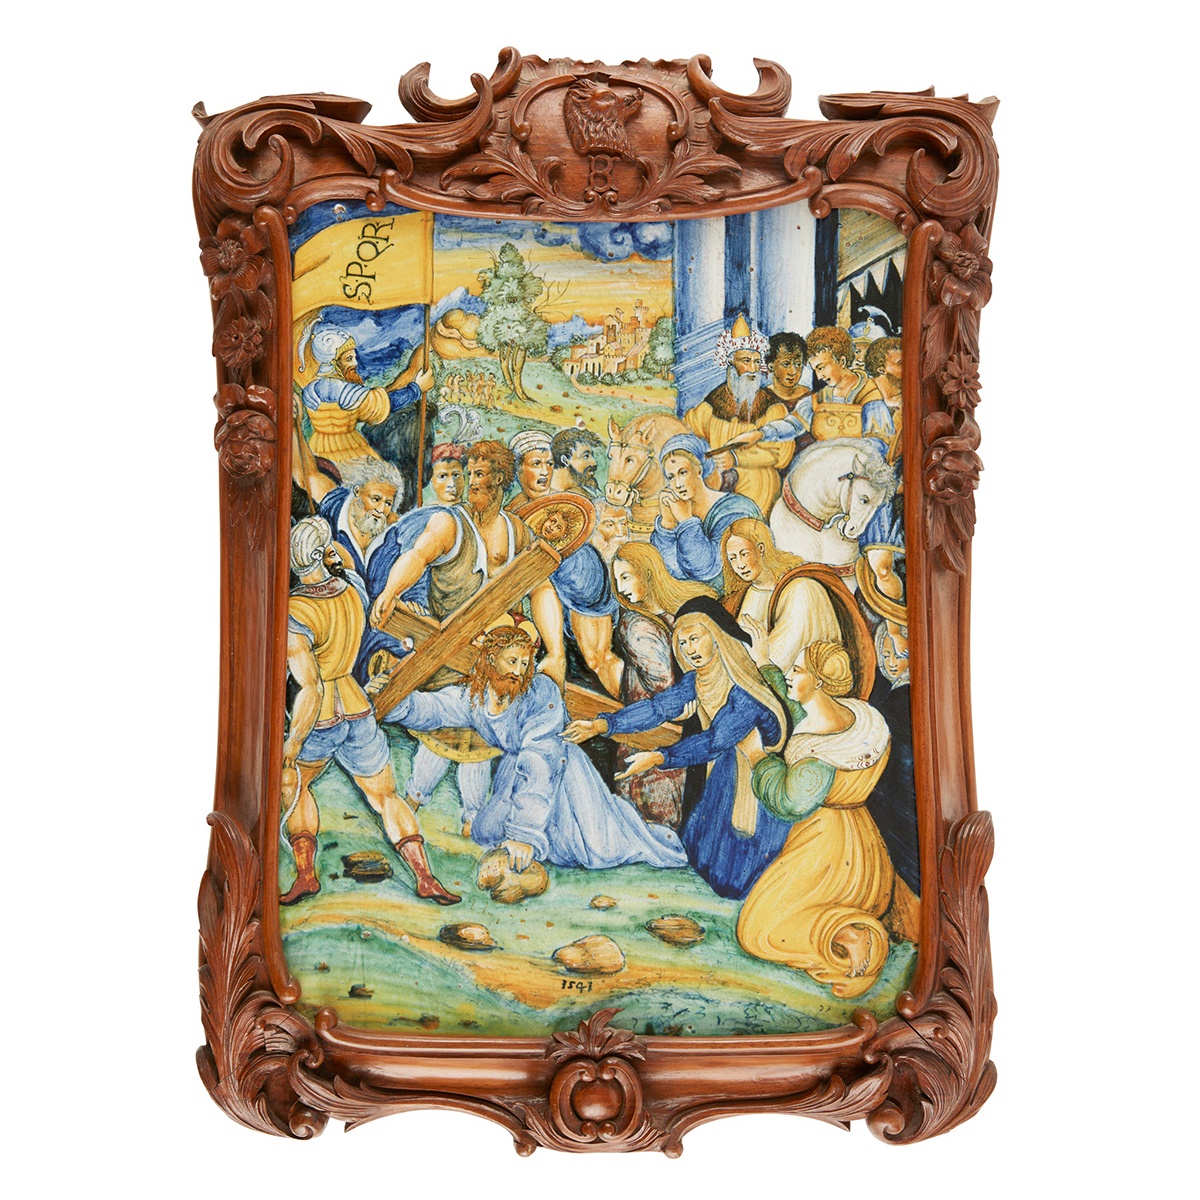 LOT 452 | ◆ RARE FRAMED MAIOLICA RECTANGULAR PLAQUE OF LARGE SCALE, DATED 1541 PAINTED IN URBINO BY A FOLLOWER OF FRANCESCO XANTO AVELLI | £30,000 - £40,000 + fees